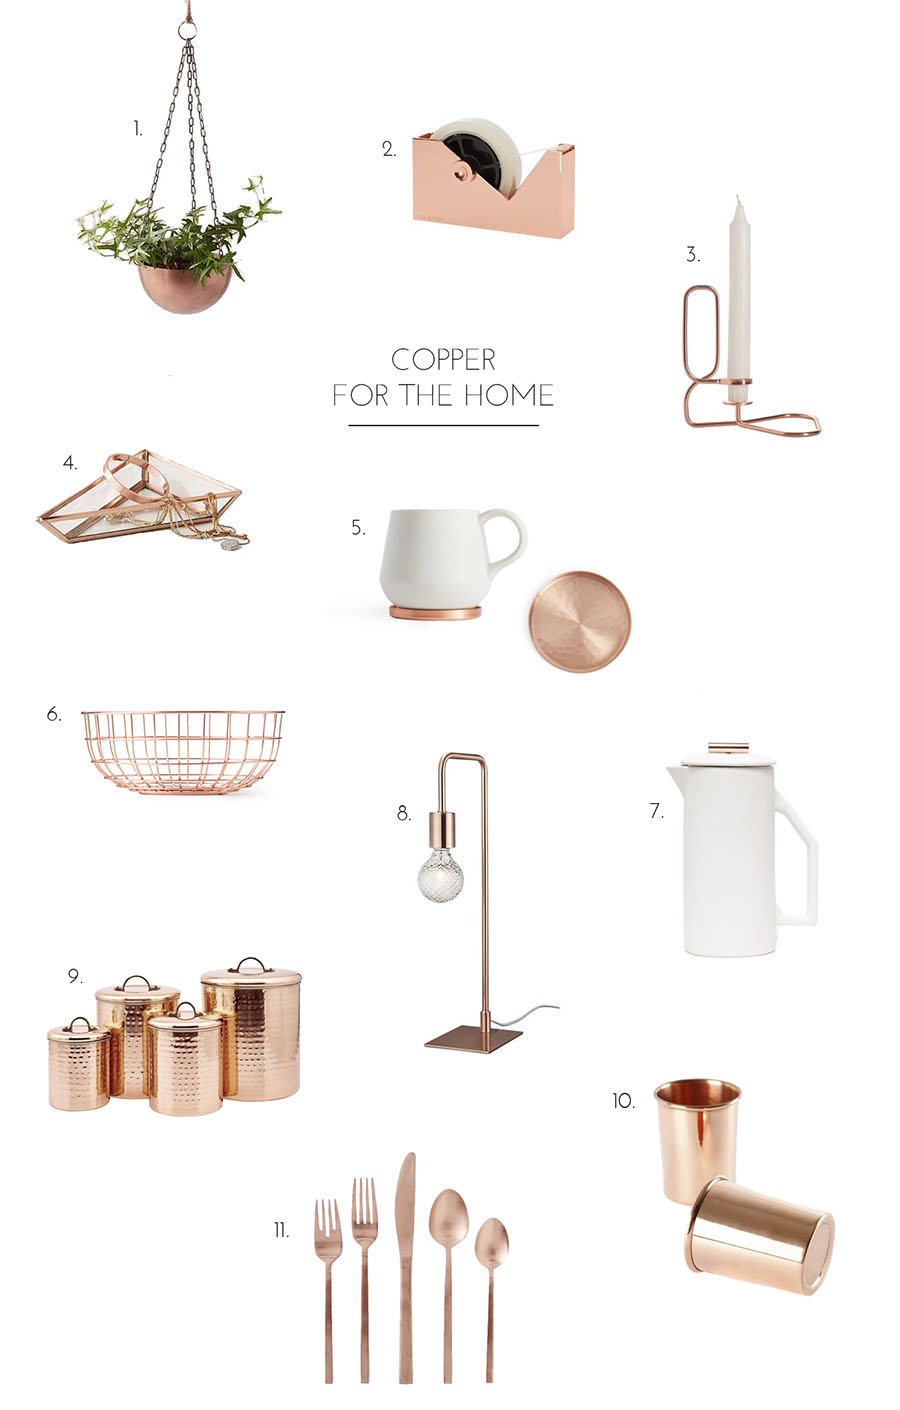 Copper for the home